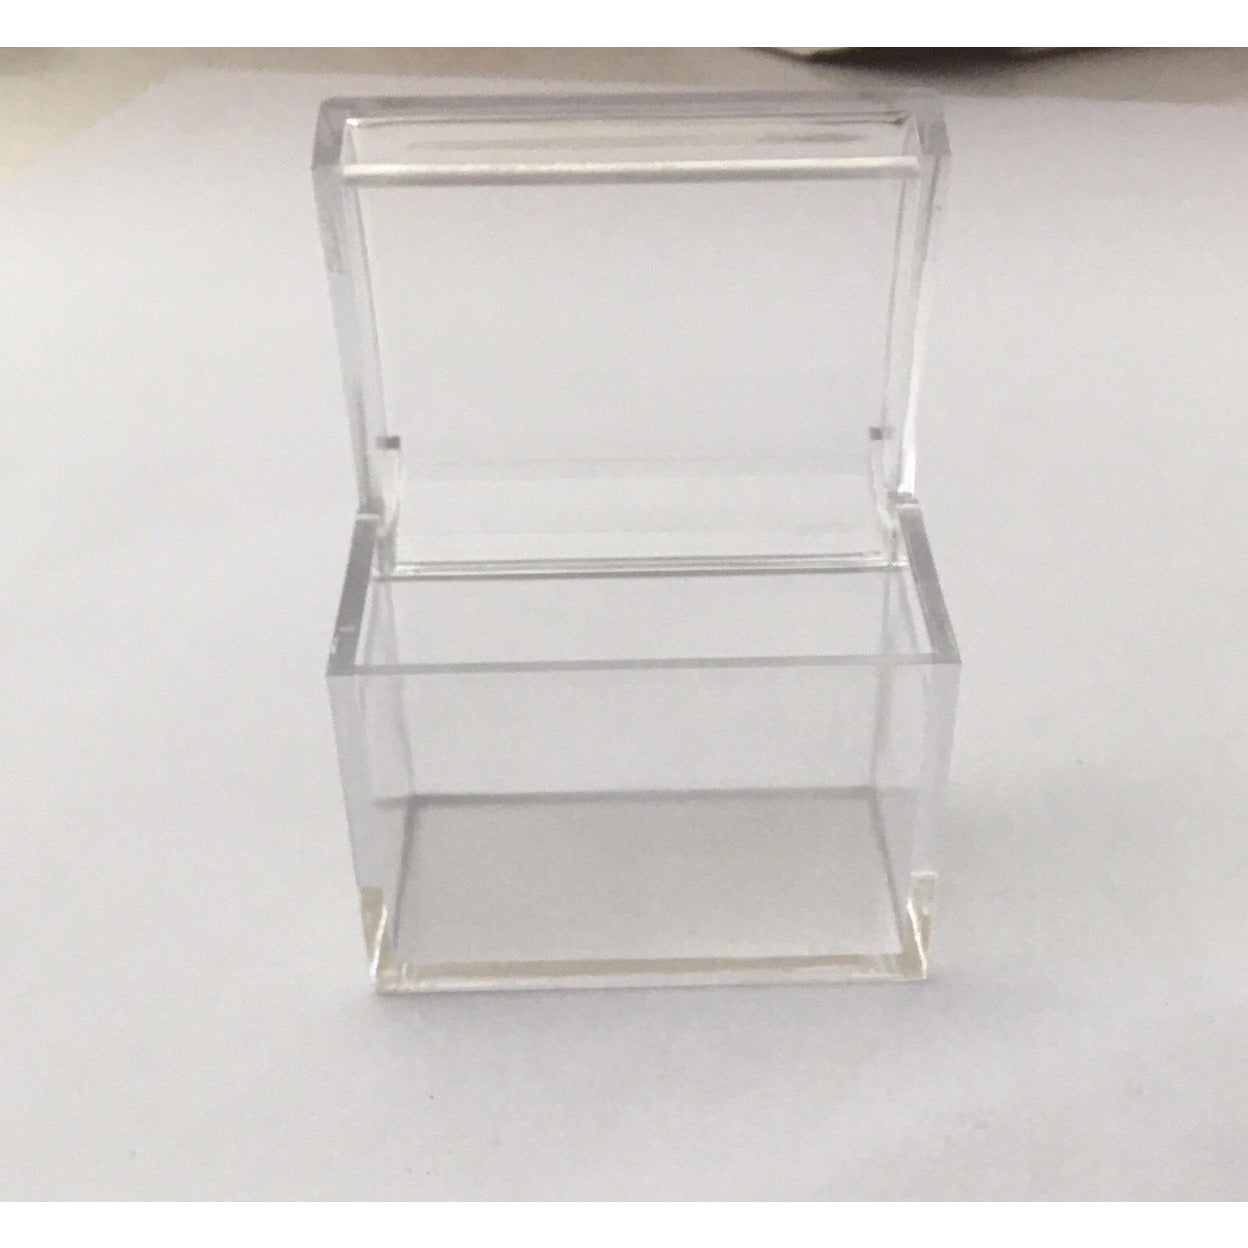 Blank Acrylic Treasure Chest Favor Gift Boxes x 12